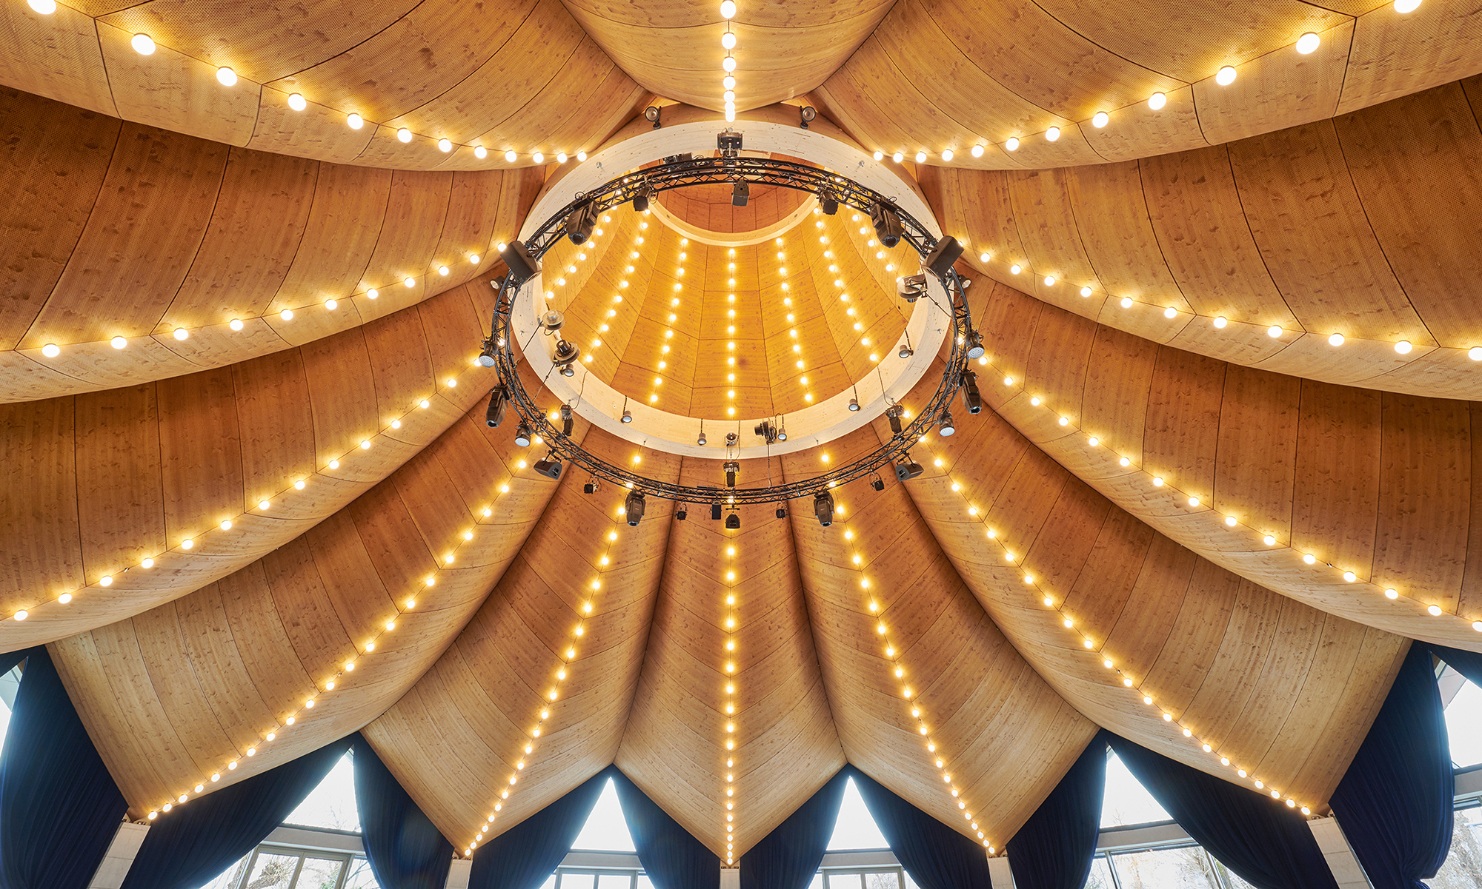 Underside of the curved, Free Form timber roof inside the magician’s hat